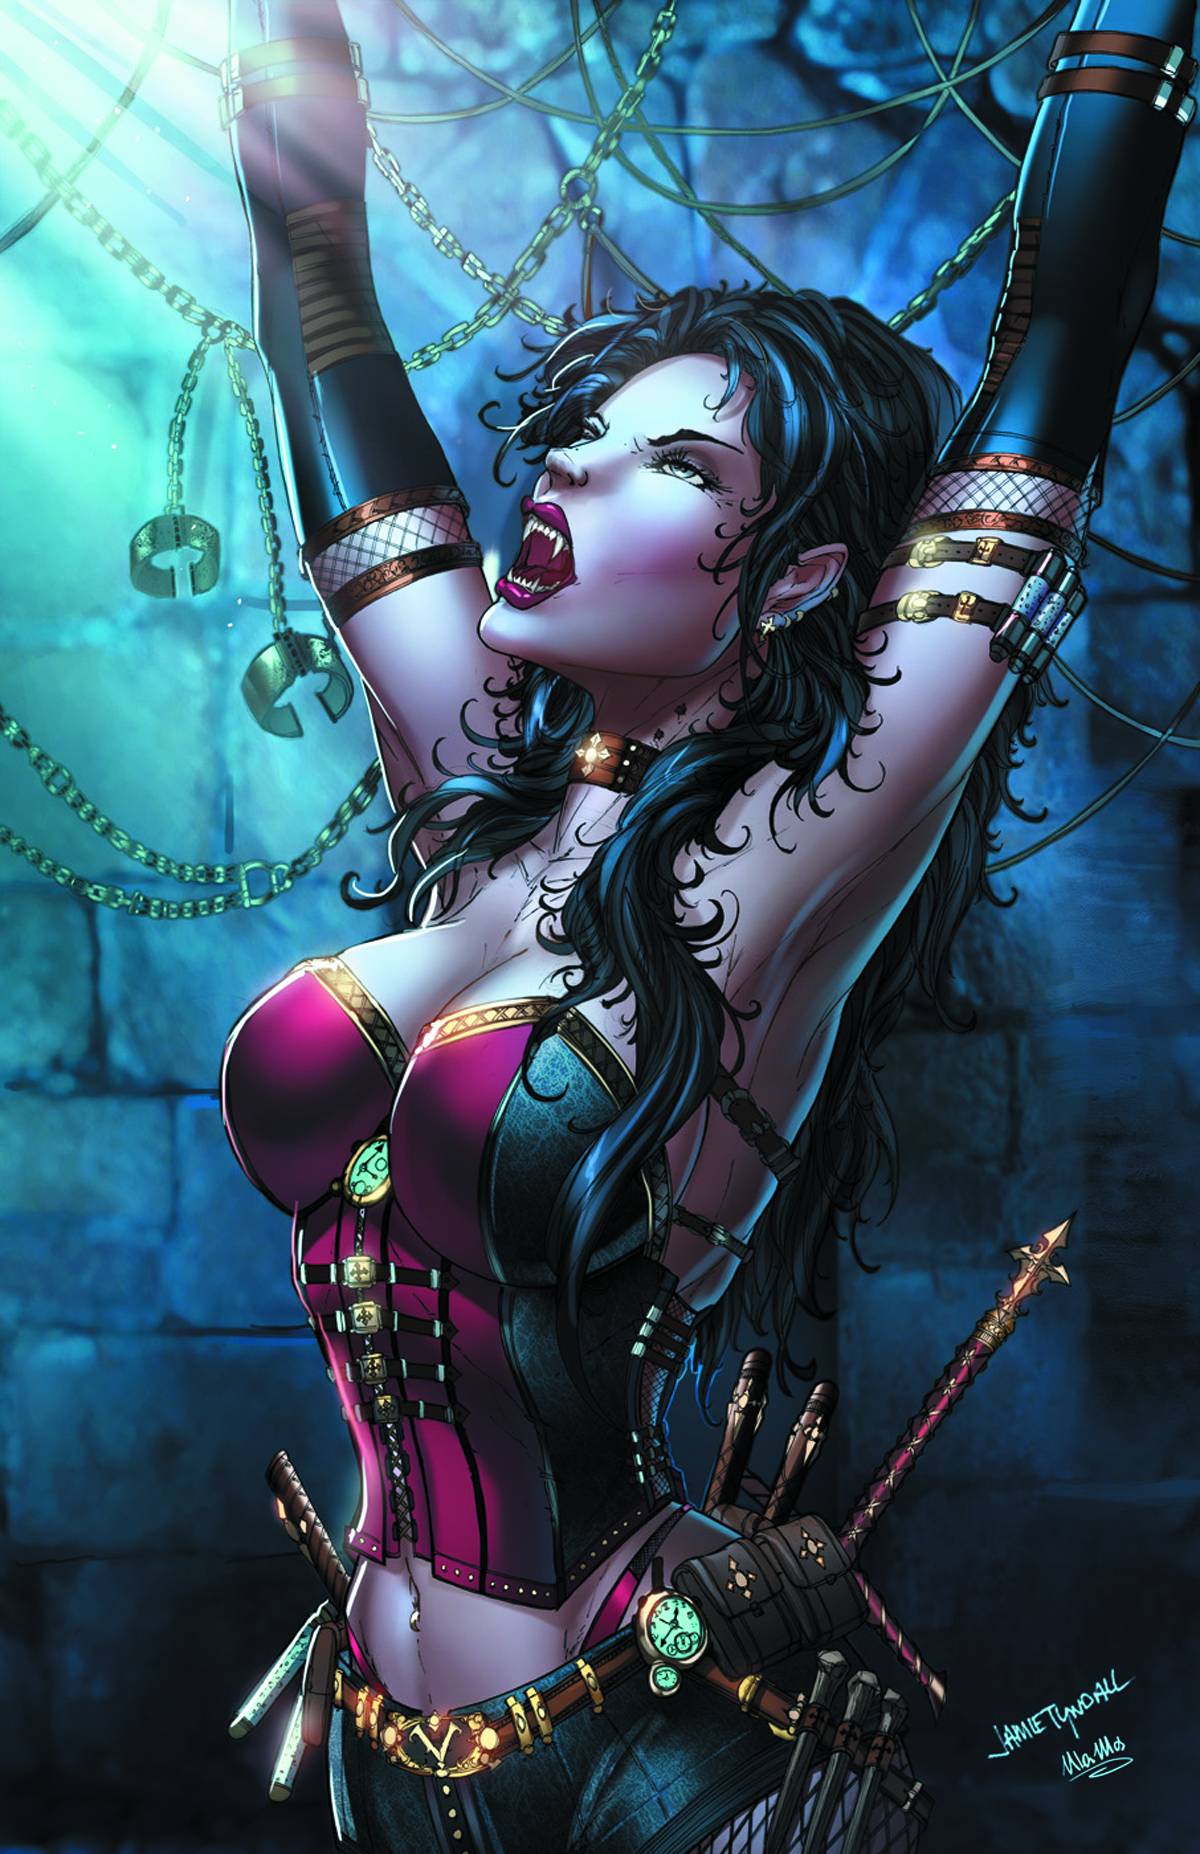 Grimm Fairy Tales: Bad Grils #4